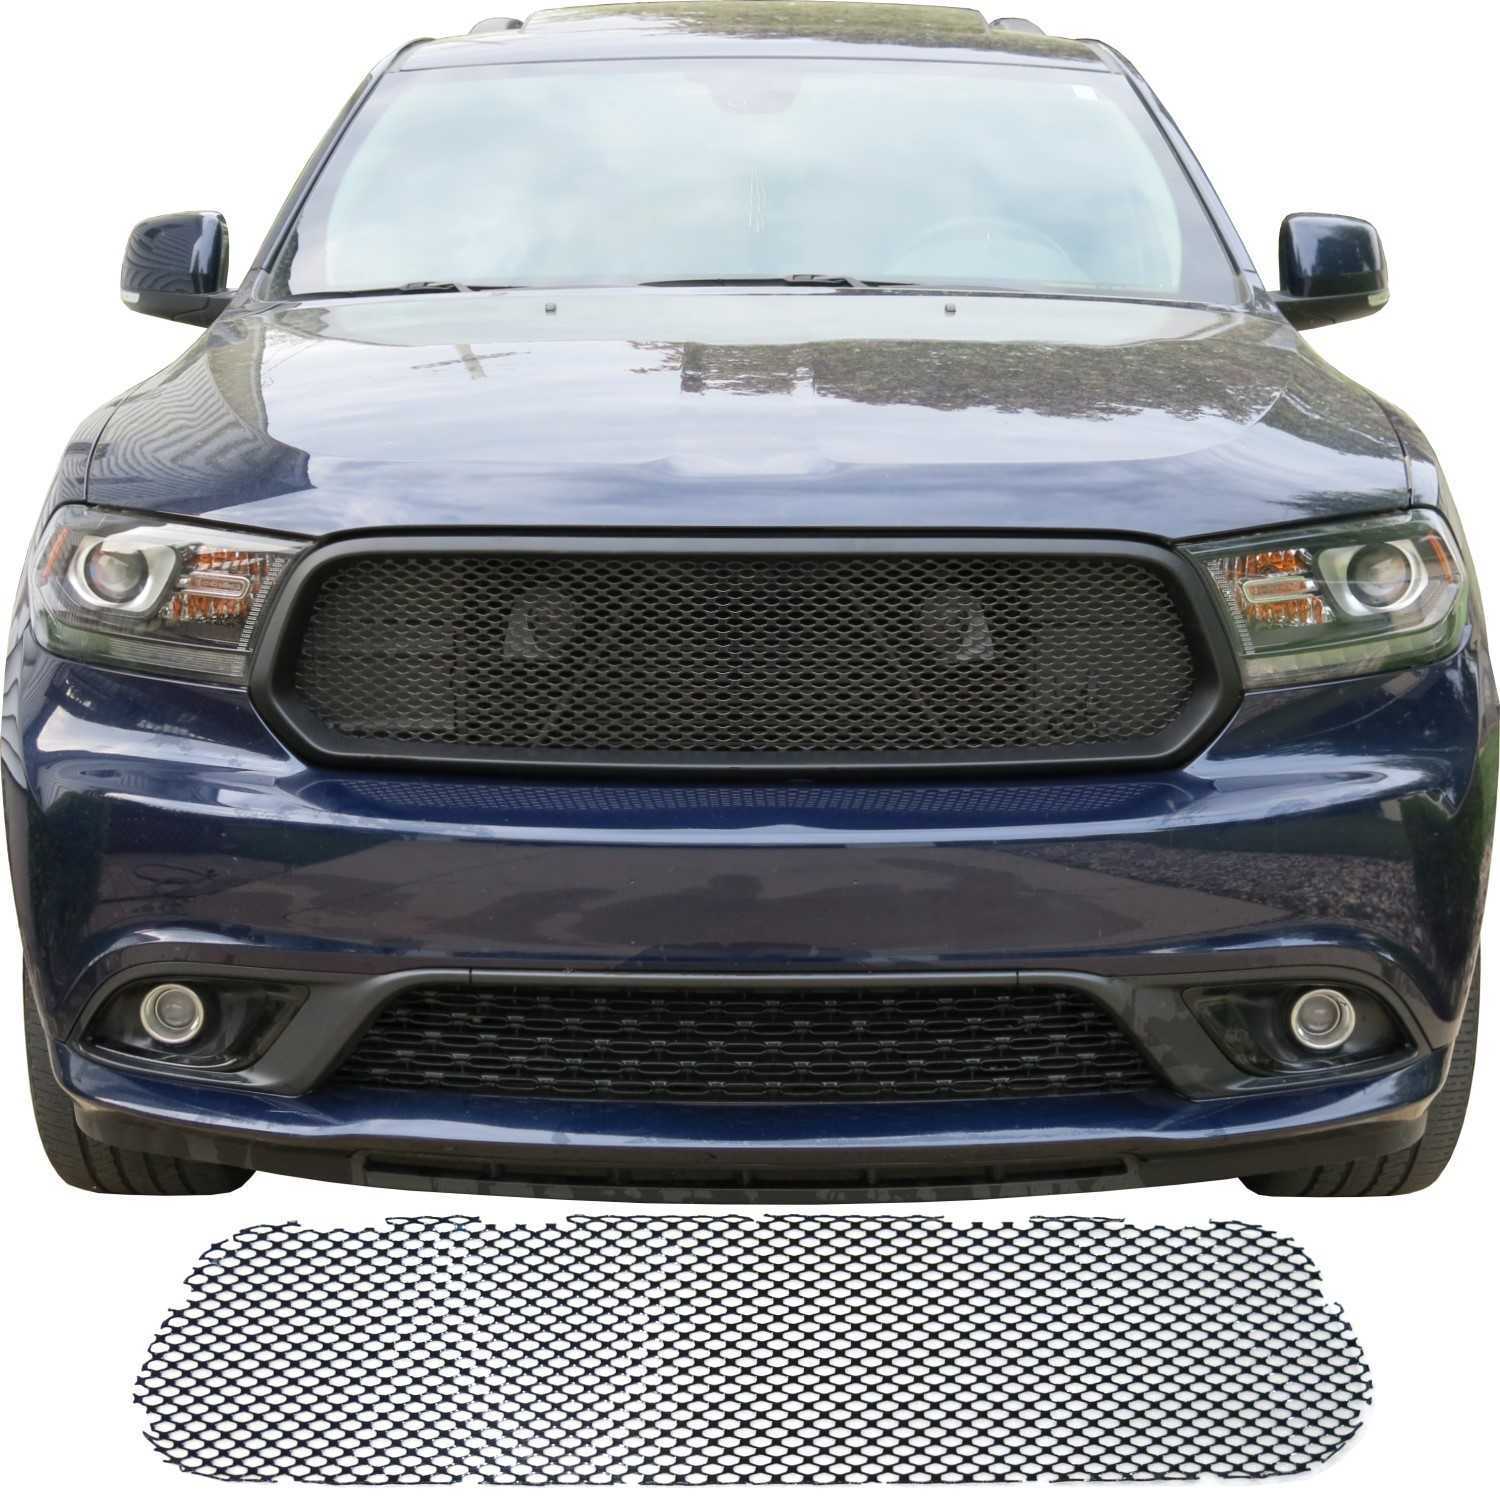 2014 - 2020 Dodge Durango Grille Mesh Piece by customcargrills